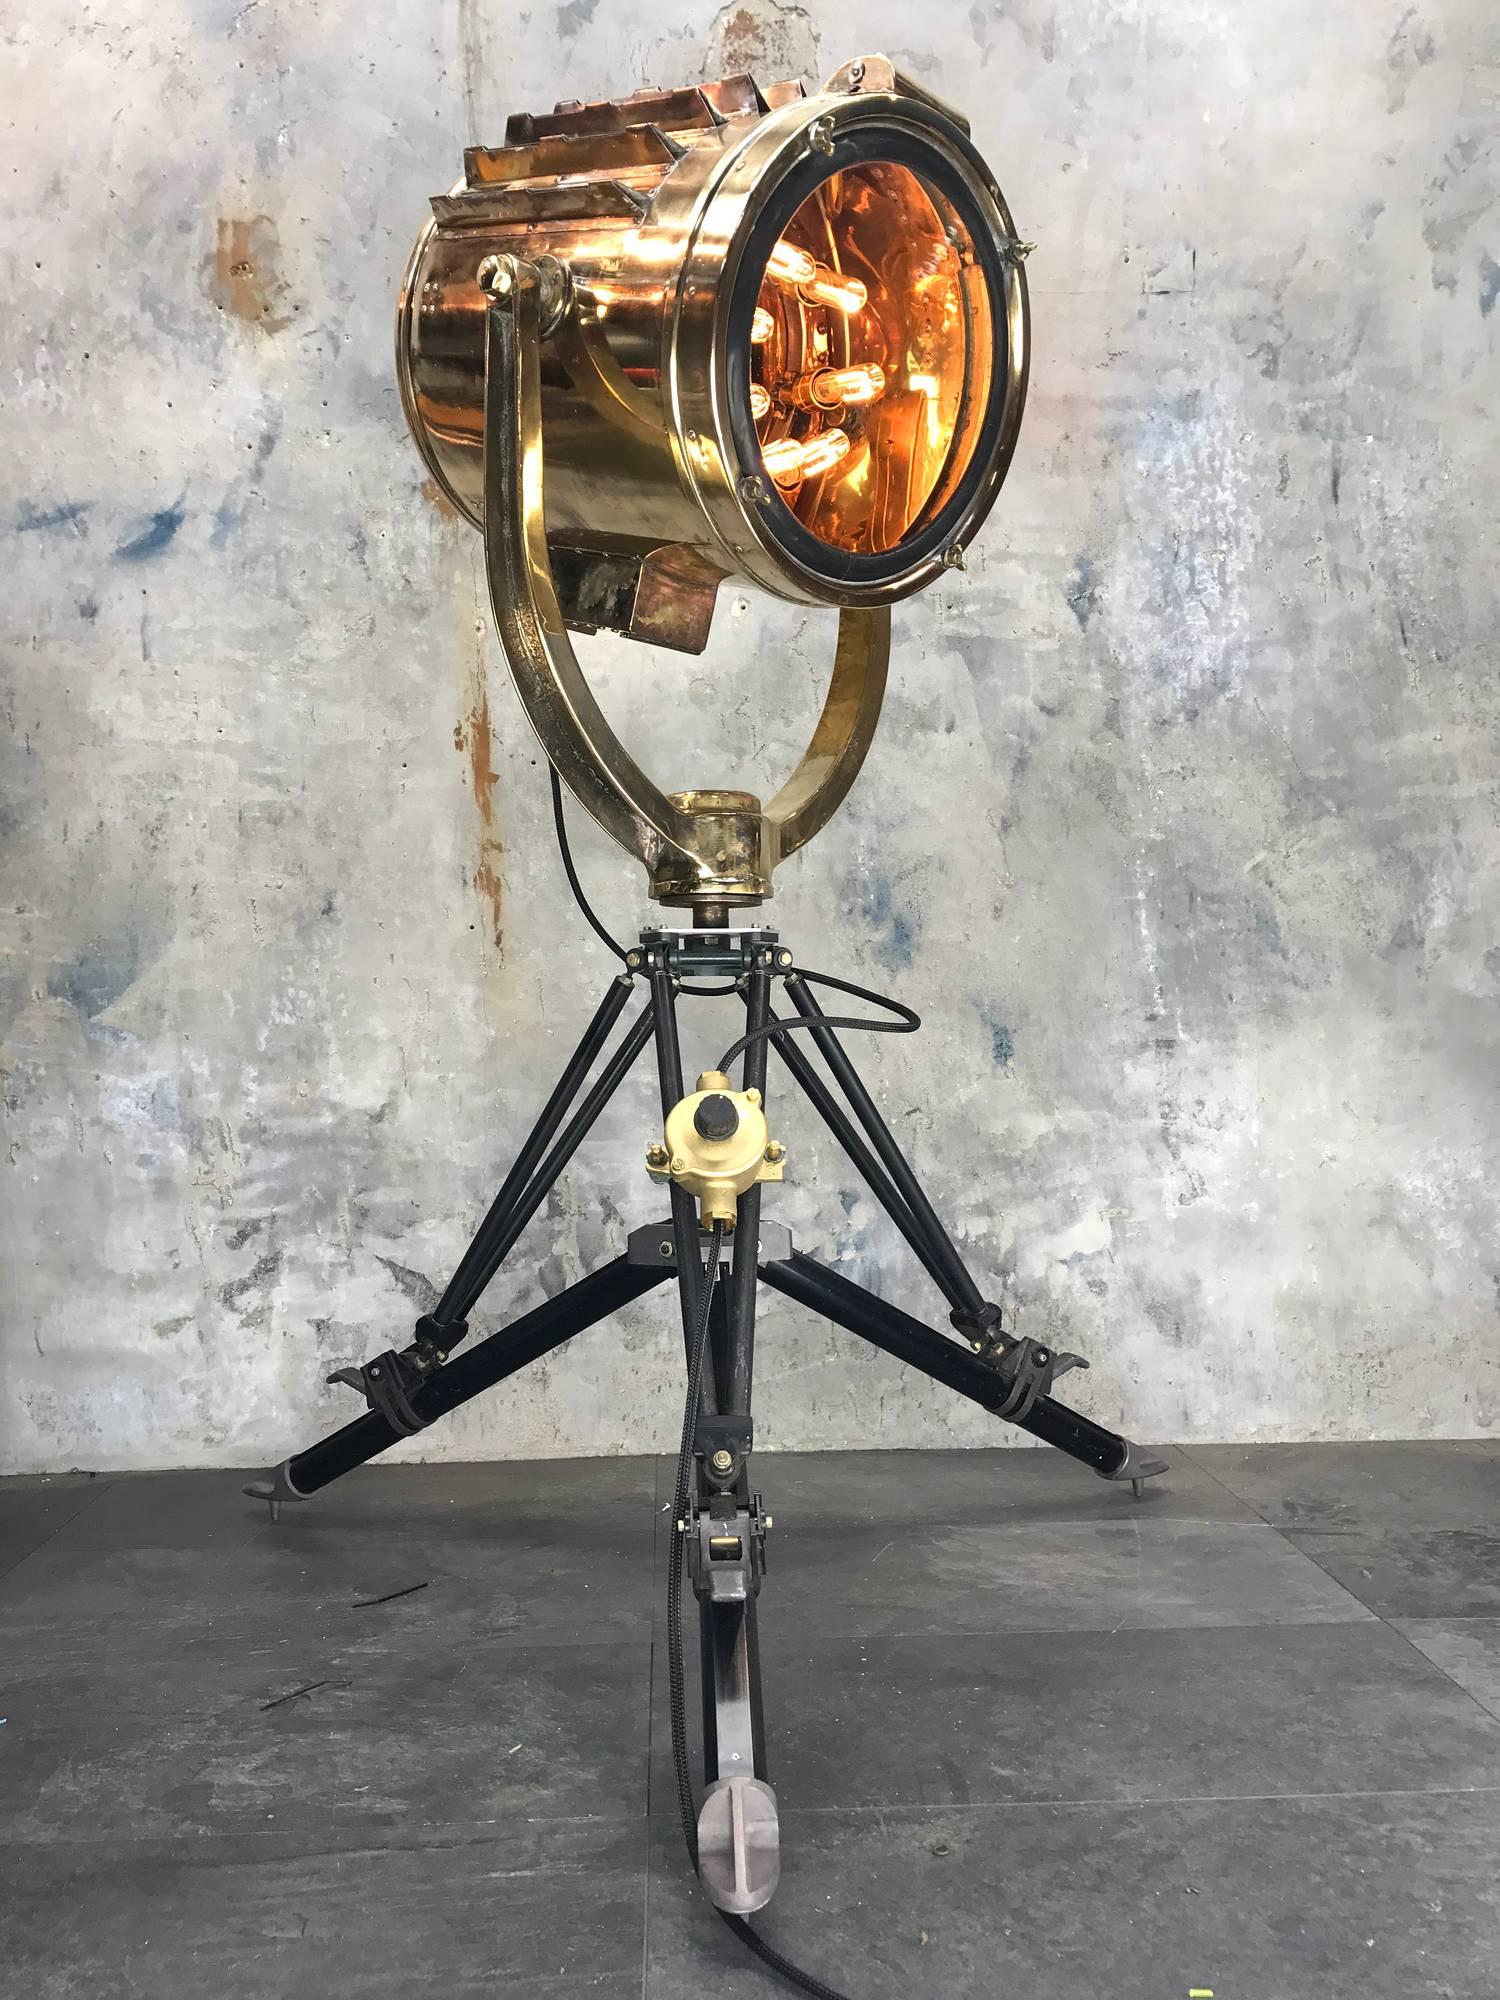 Shonan Kosakusho Co. Brass 30cm searchlight mounted on an Ex MOD mortar tripod.

The searchlight is reclaimed from Super tankers built during the 1970s and originally operated a 1000 W searchlight bulb, here at Loomlight we have fabricated and